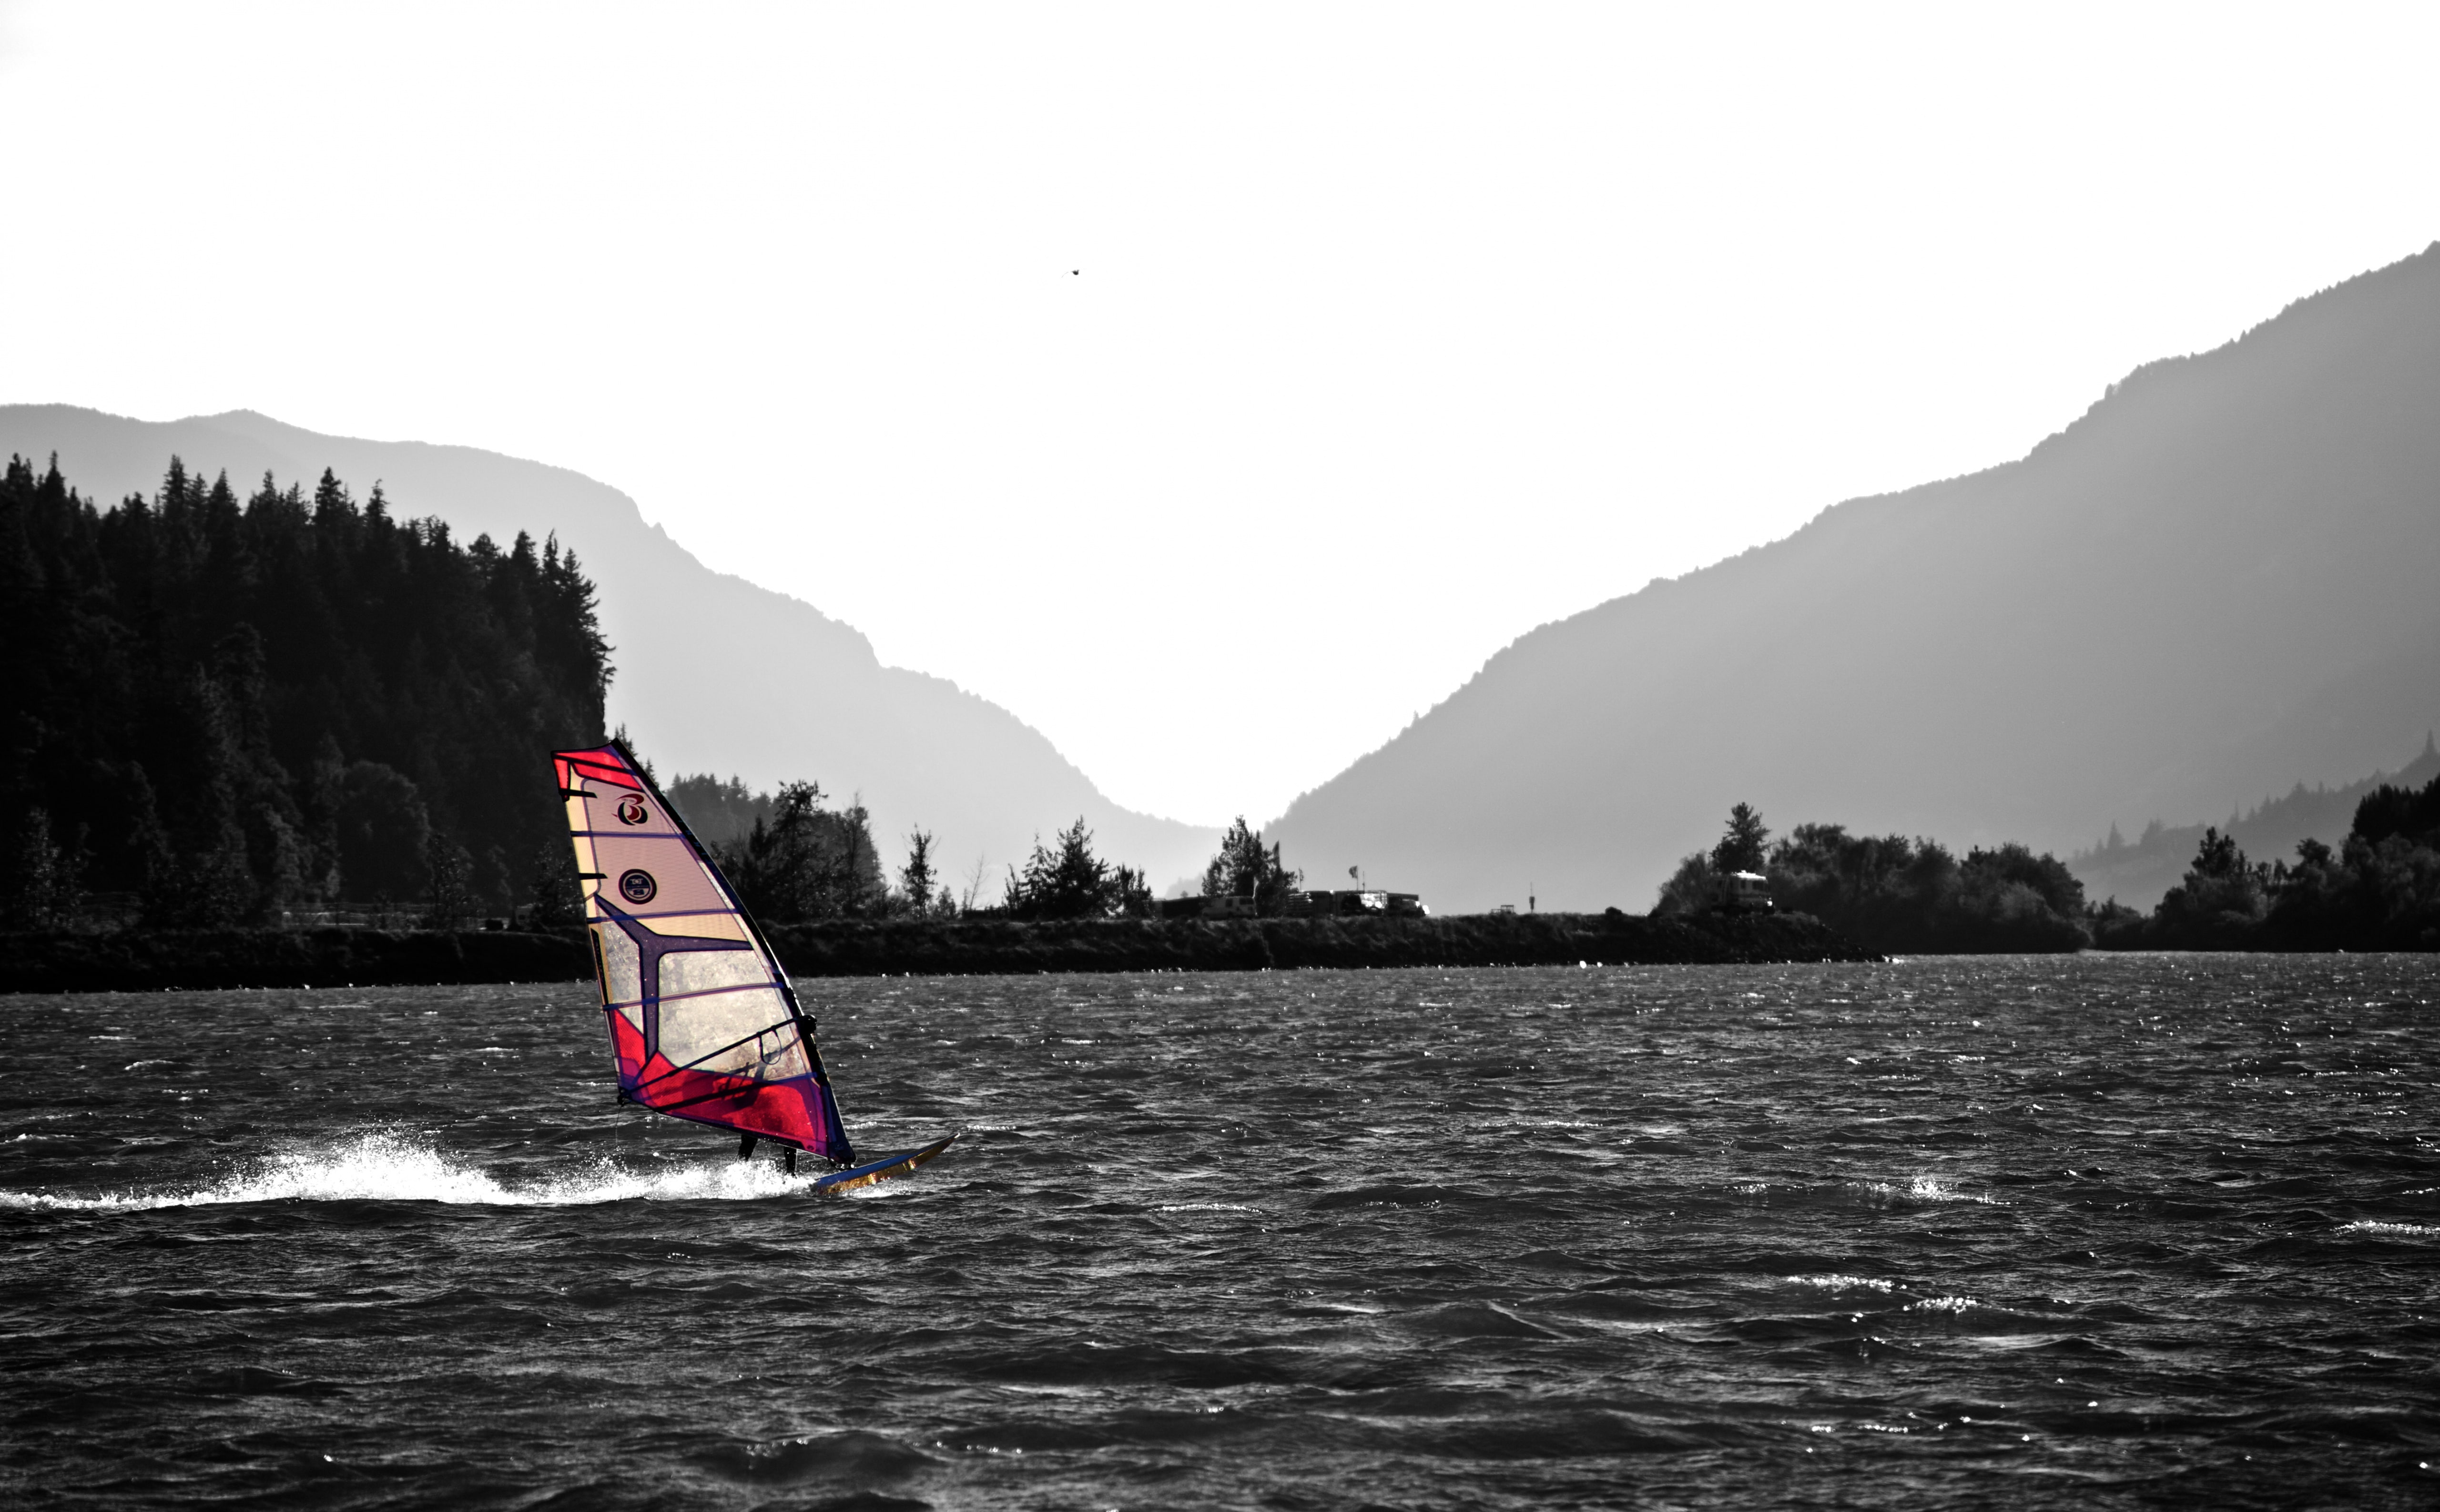 Windsurfing In The Columbia River Gorge, white and red sailboat